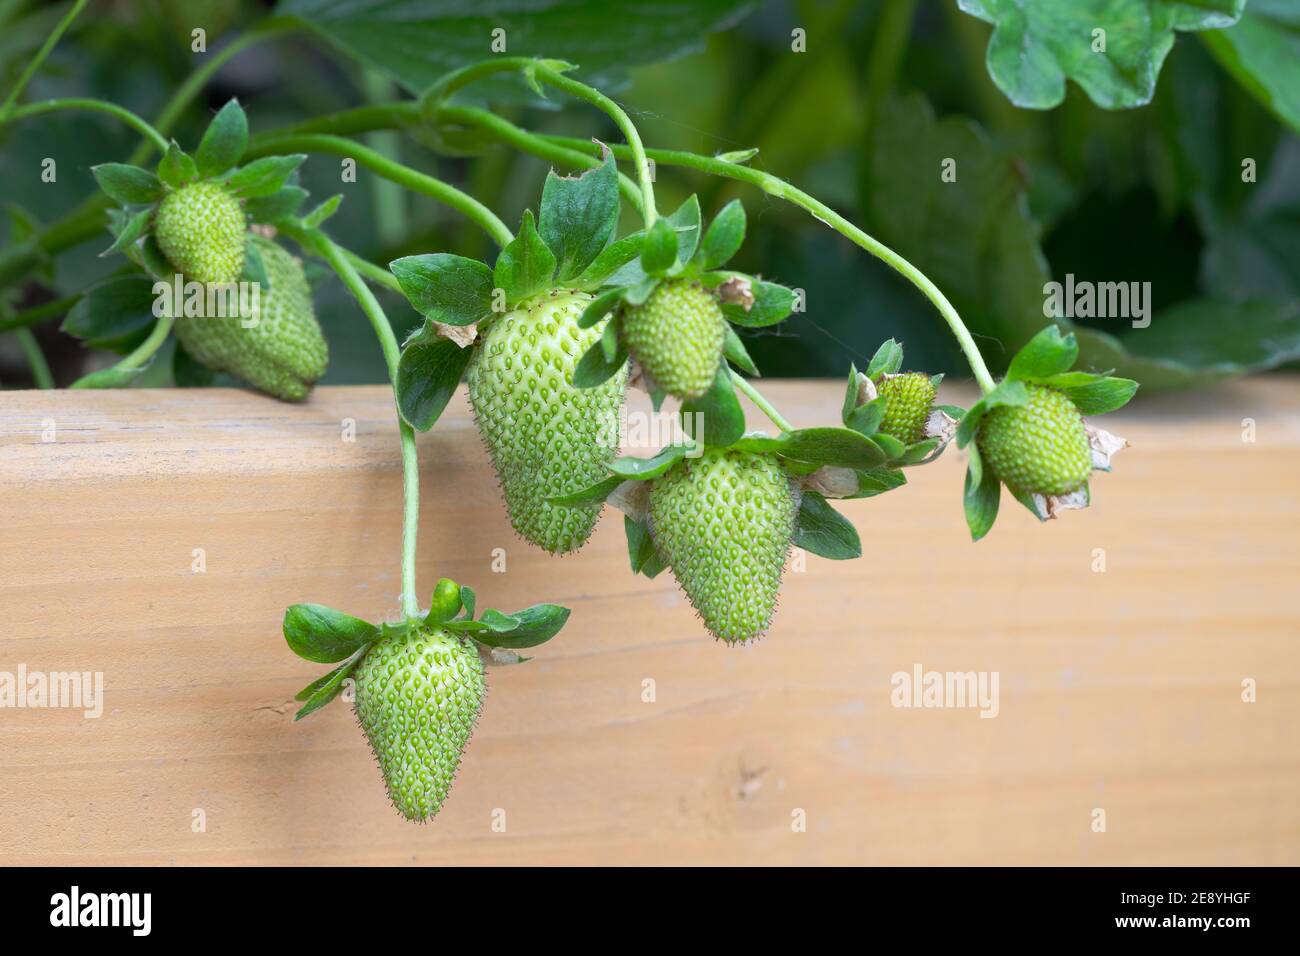 Close-up of Green, Unripe Strawberries in Garden Stock Photo